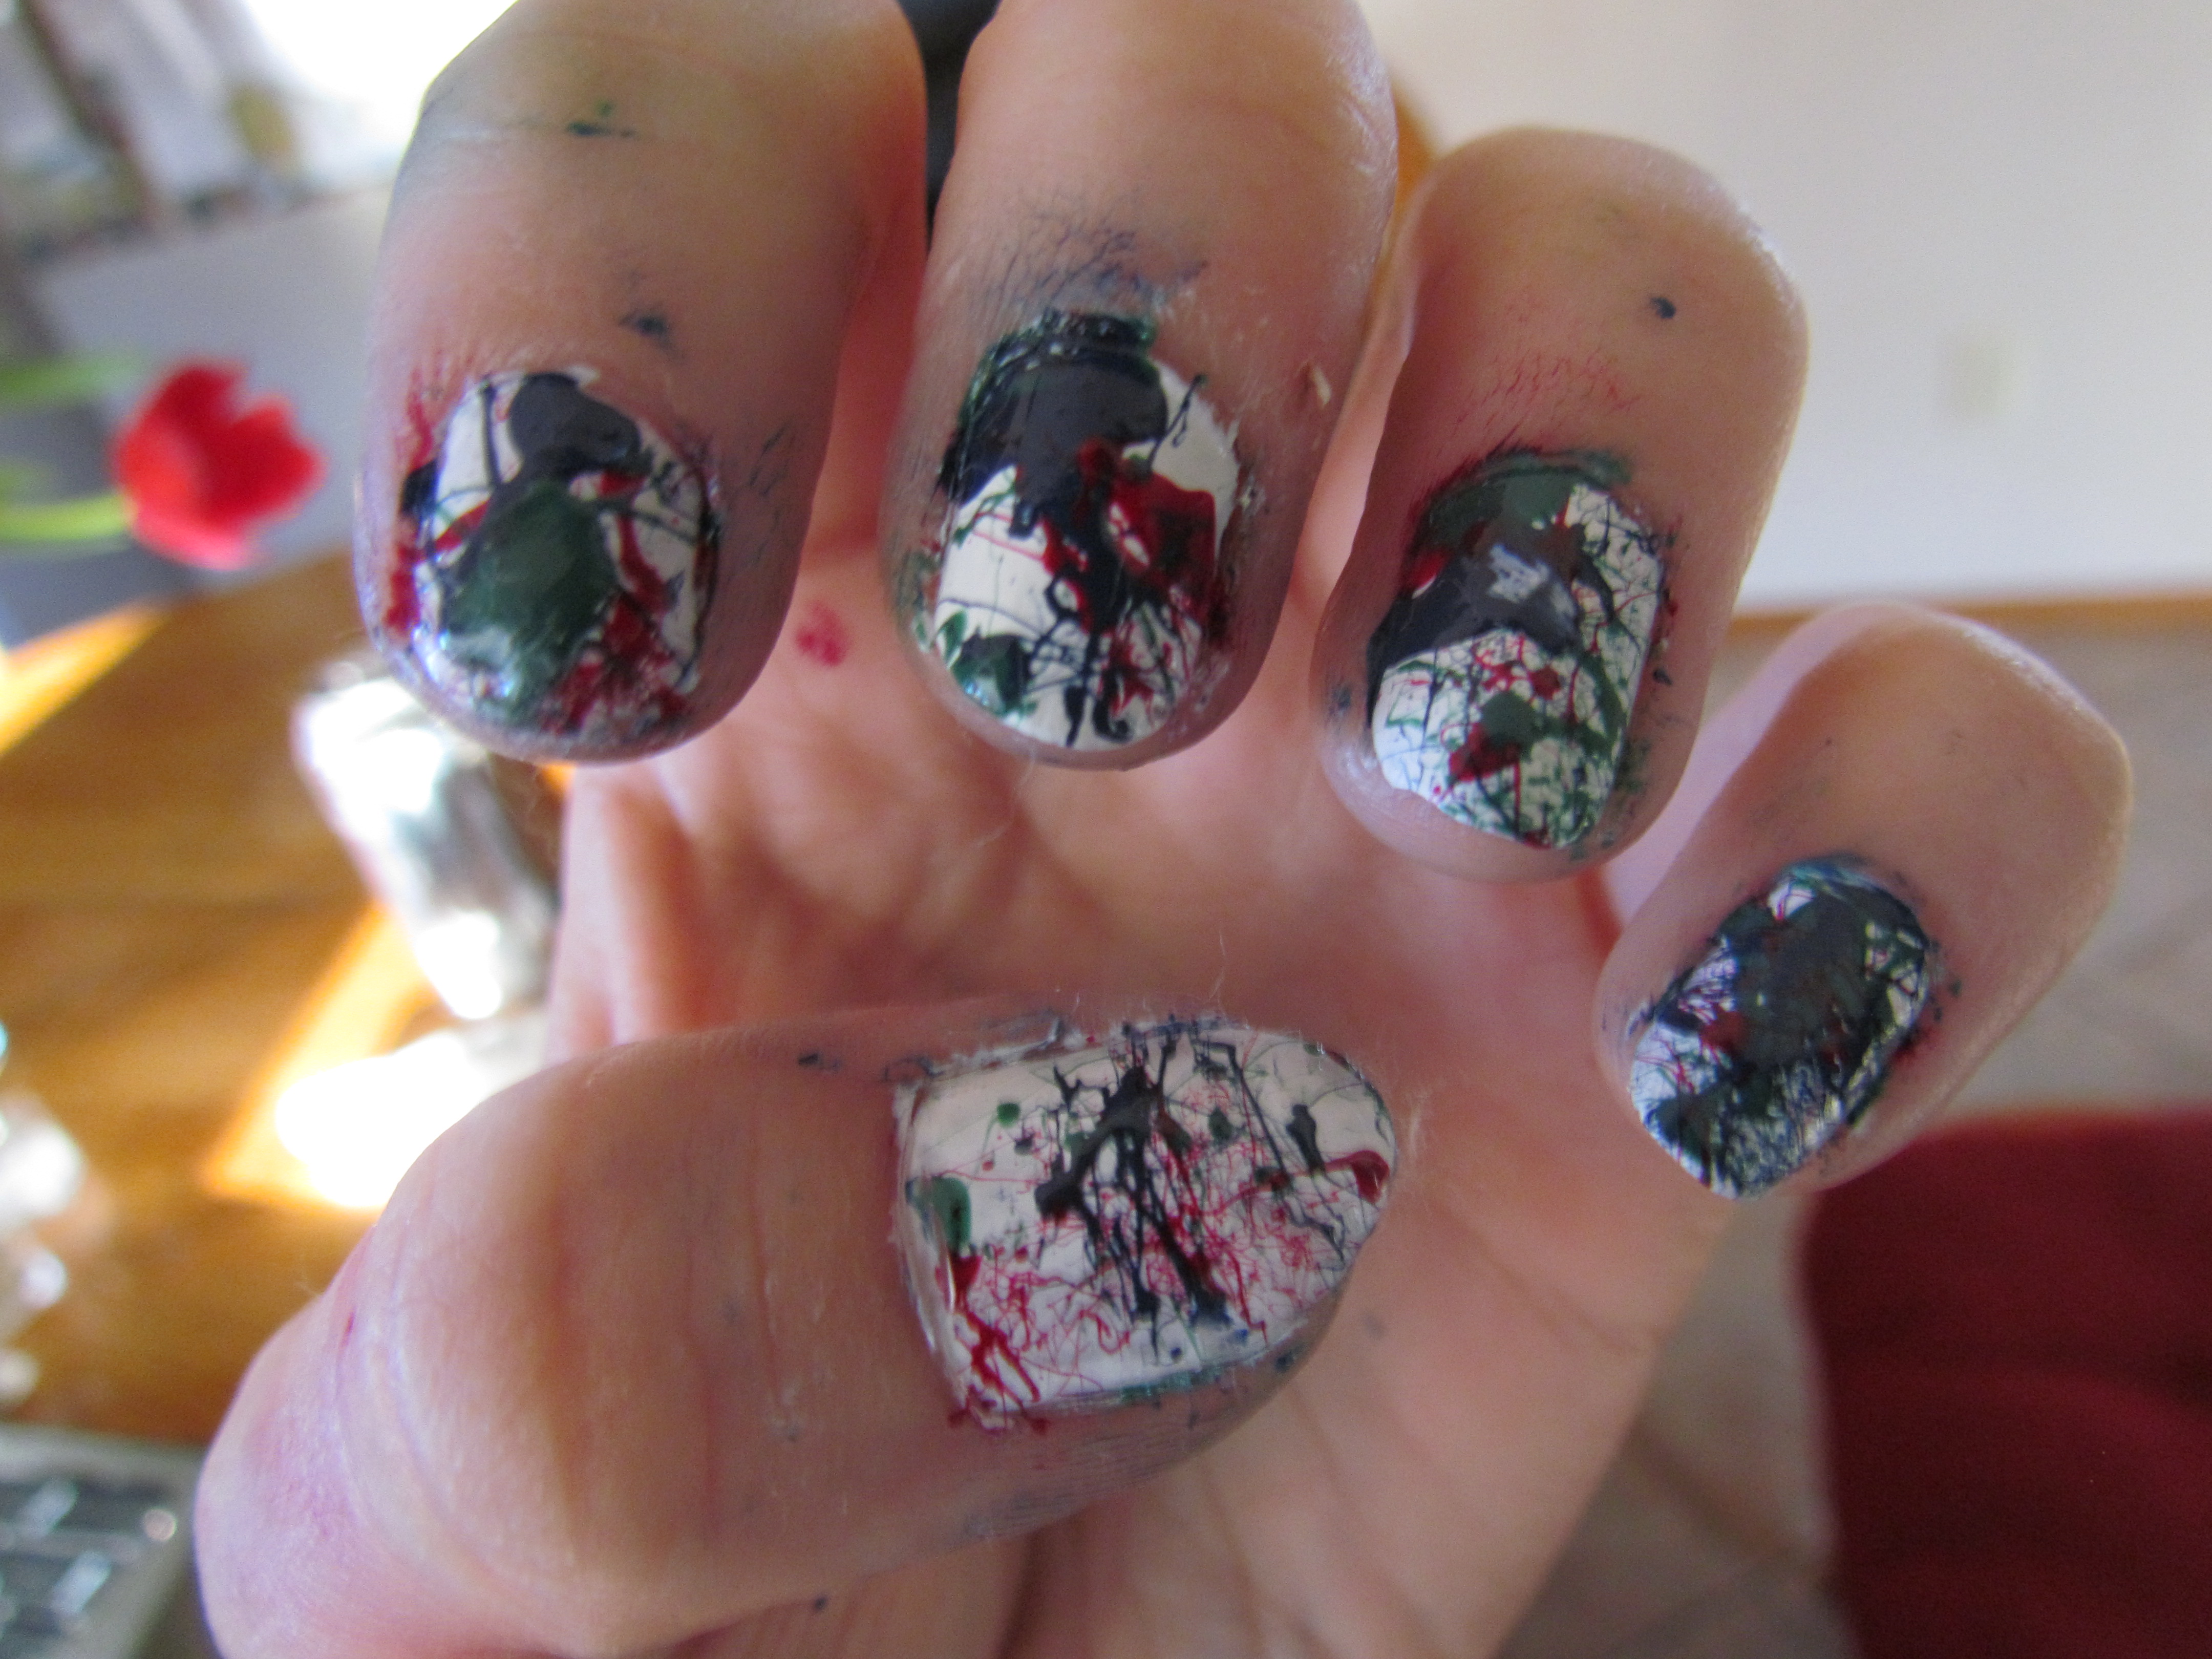 Five Nail Hacks To Try If You're Lacking Artistic Ability (Or Patience) -  HTF Magazine